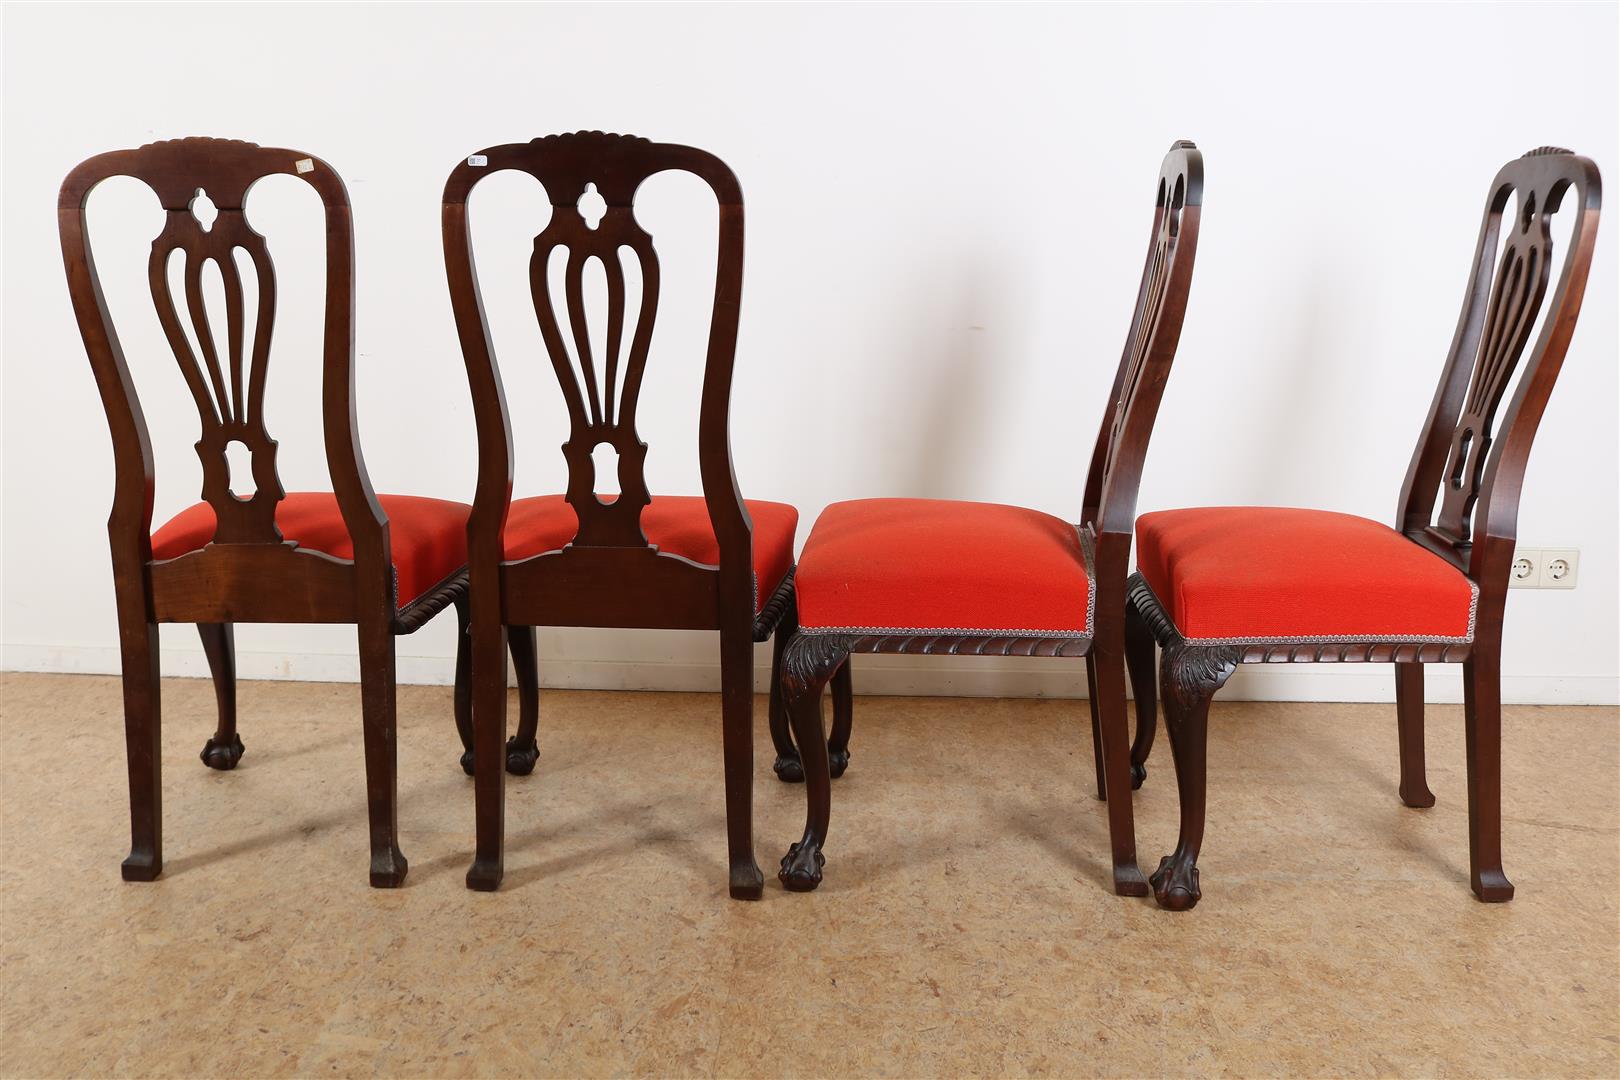 Series of 4 Chippendale-style chairs with elaborate backrest, red fabric seat on ball claw feet, - Image 4 of 4